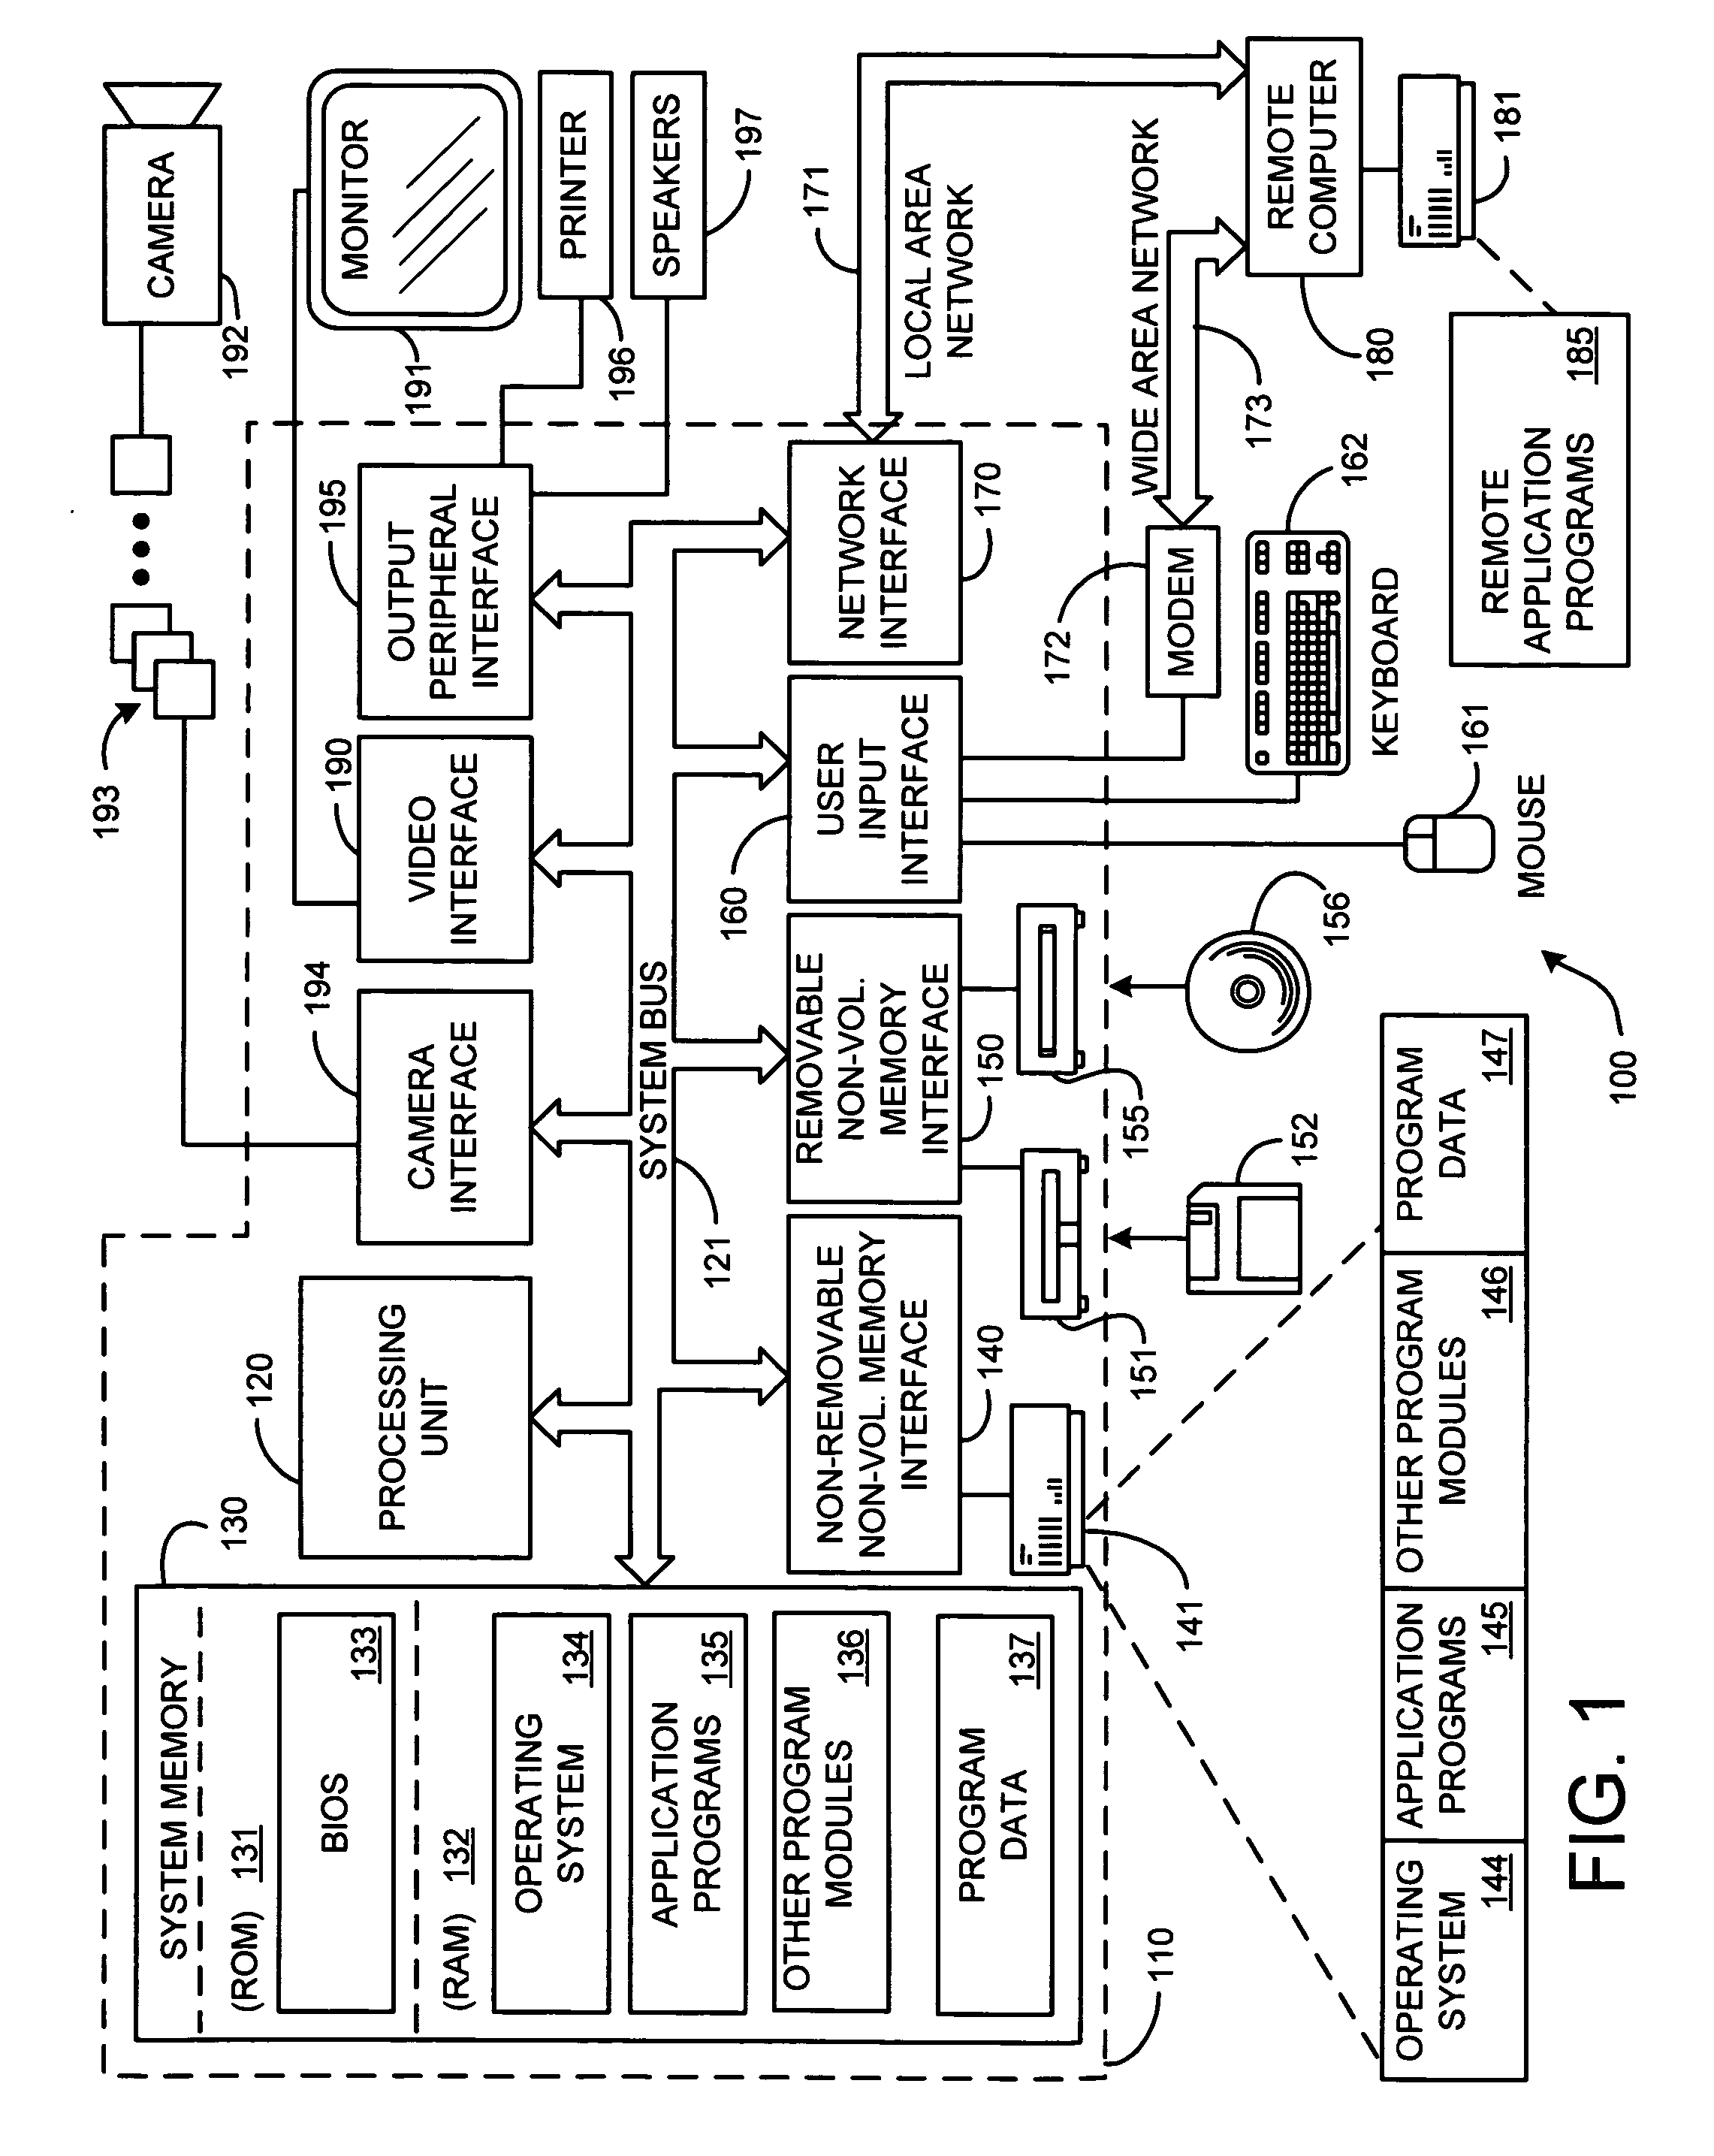 System and method for exchanging images